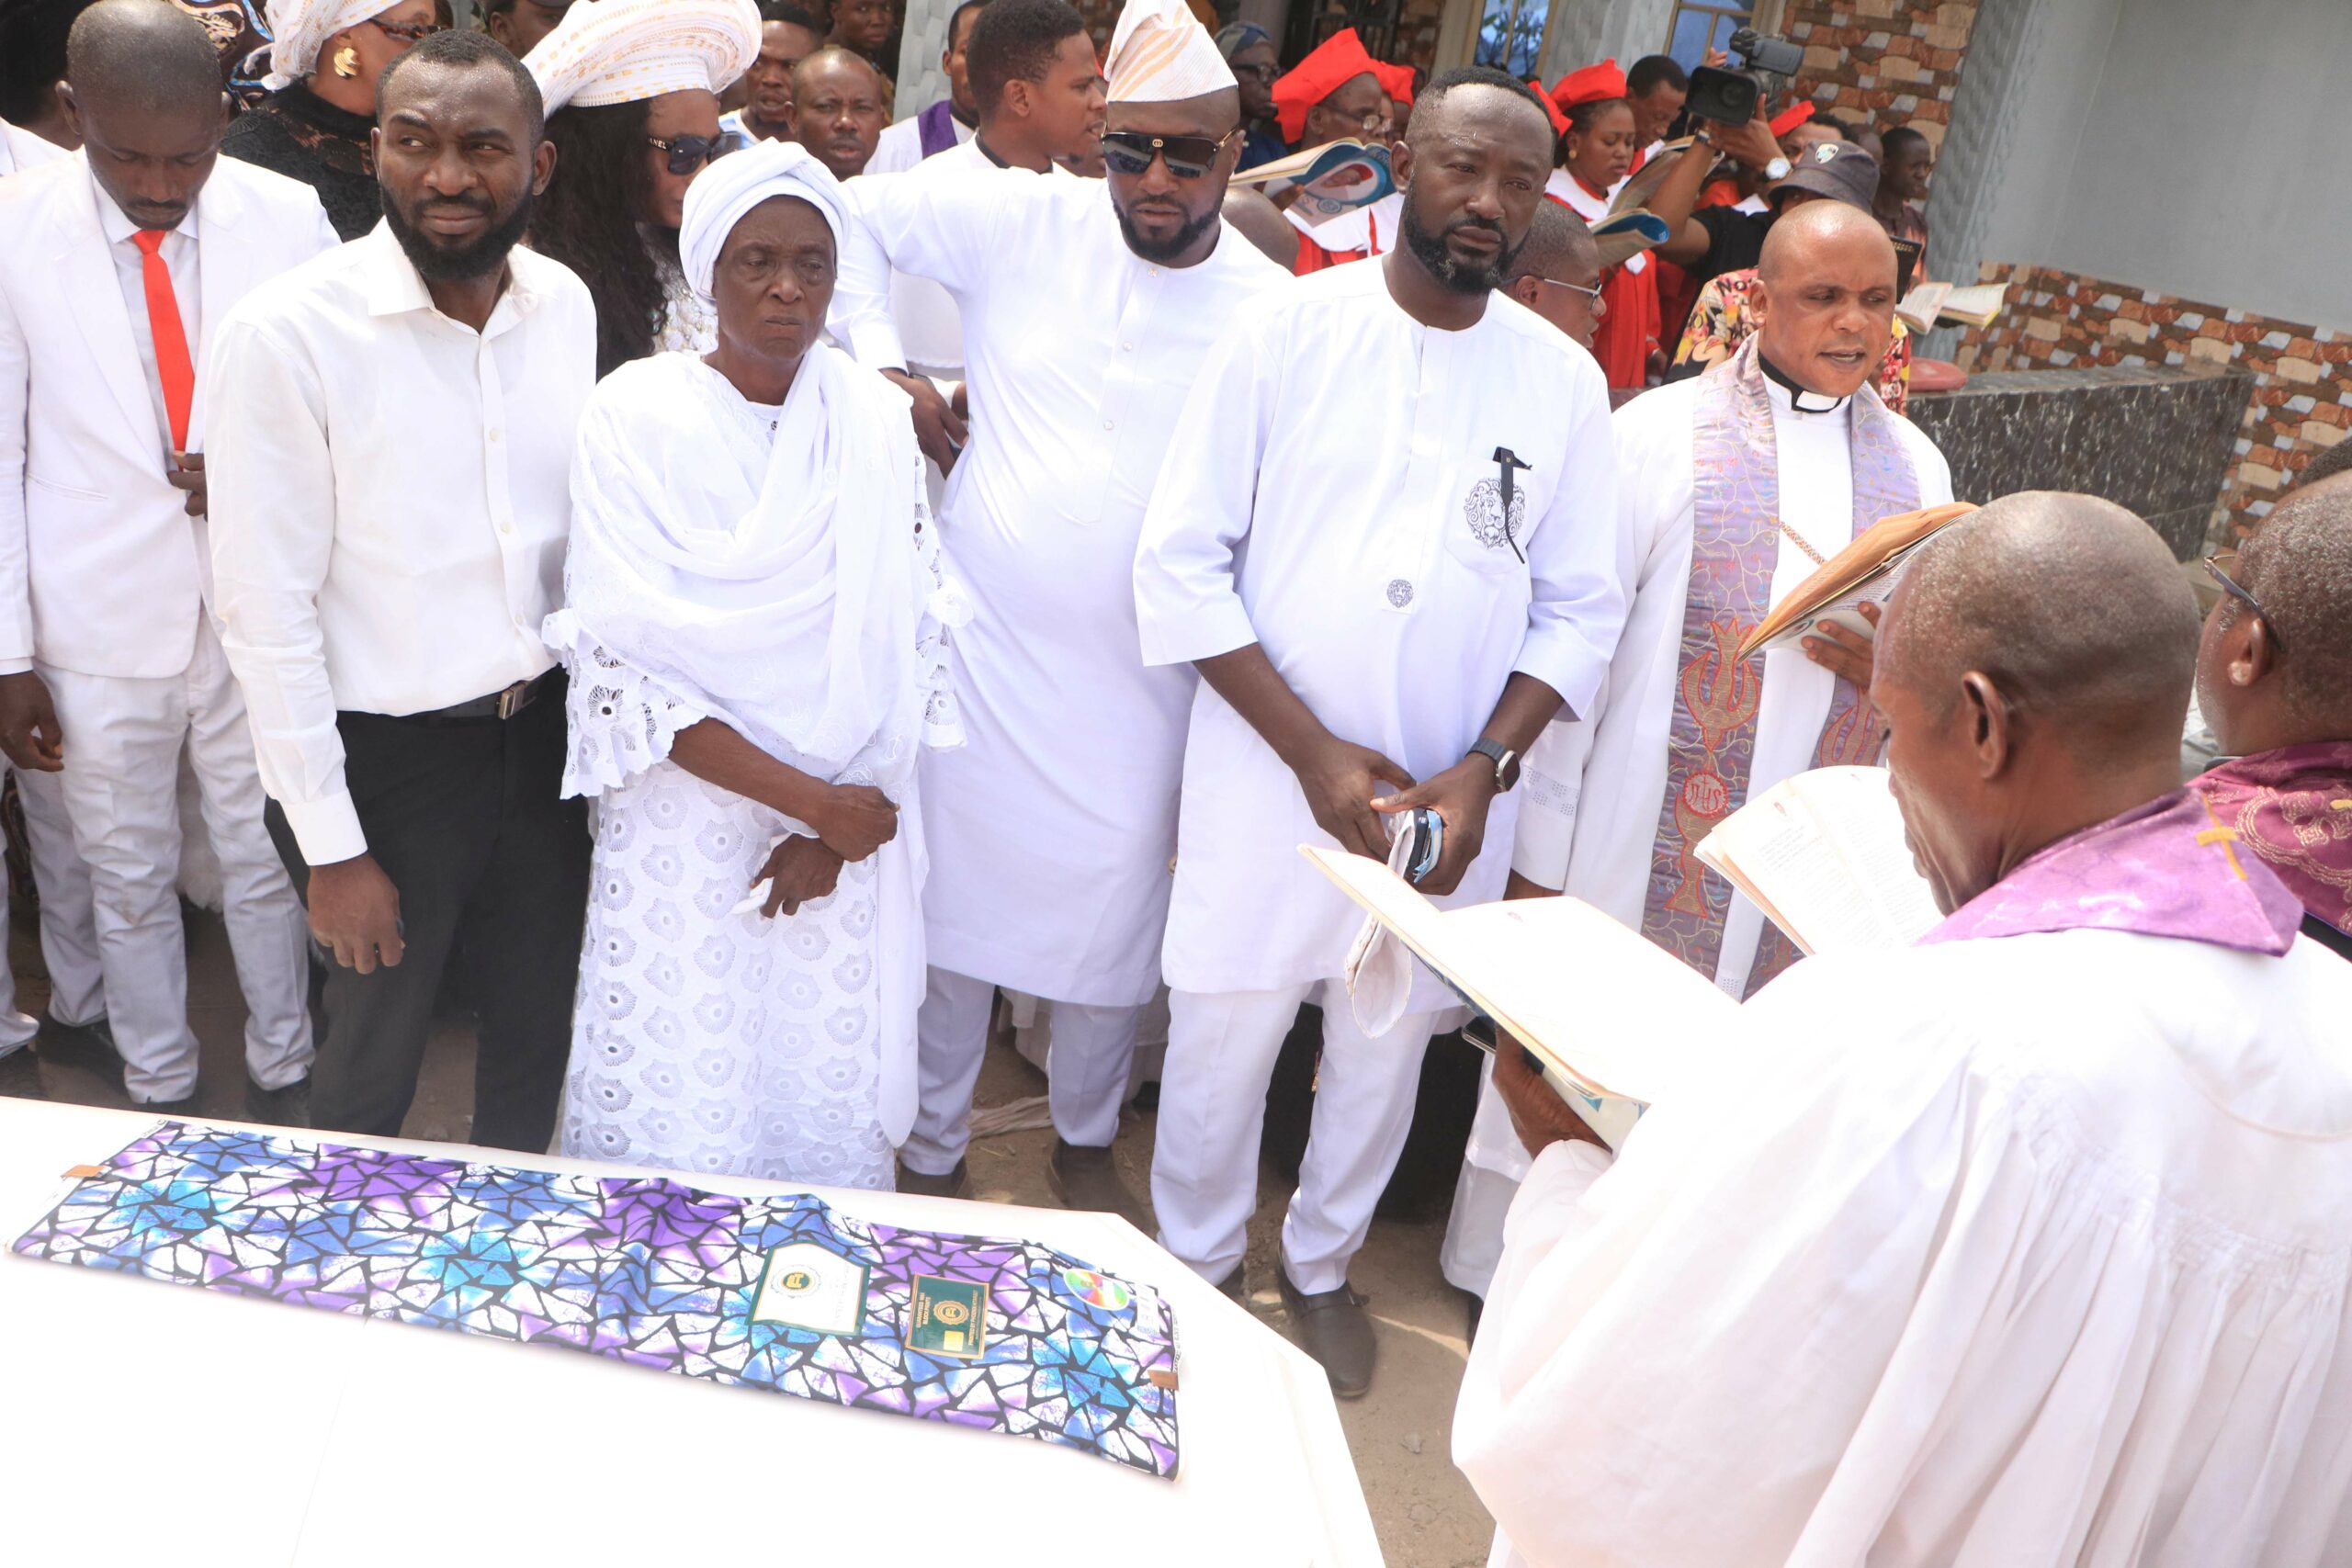 David Mark, Ortom, Moro, Ochoga, others pay tributes as James Oche’s father is laid to rest